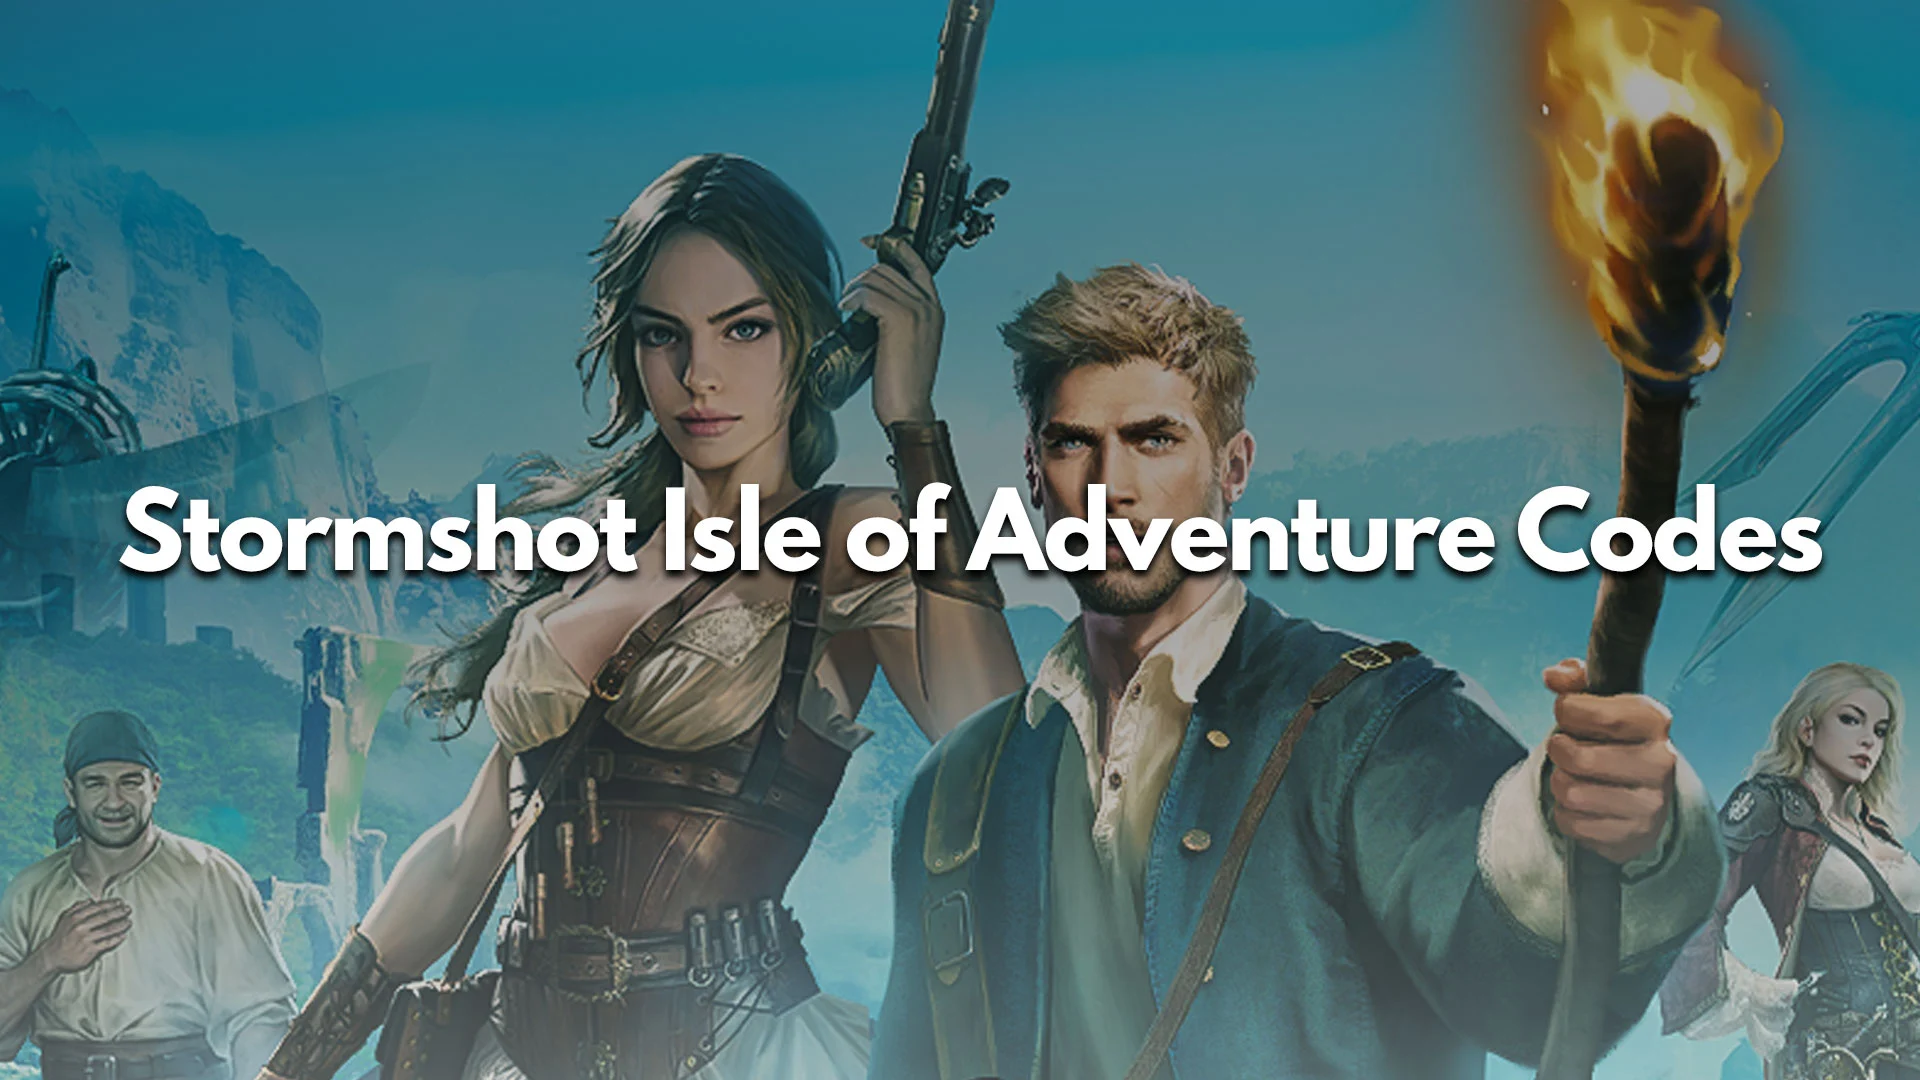 download the new version for iphoneStormshot: Isle of Adventure